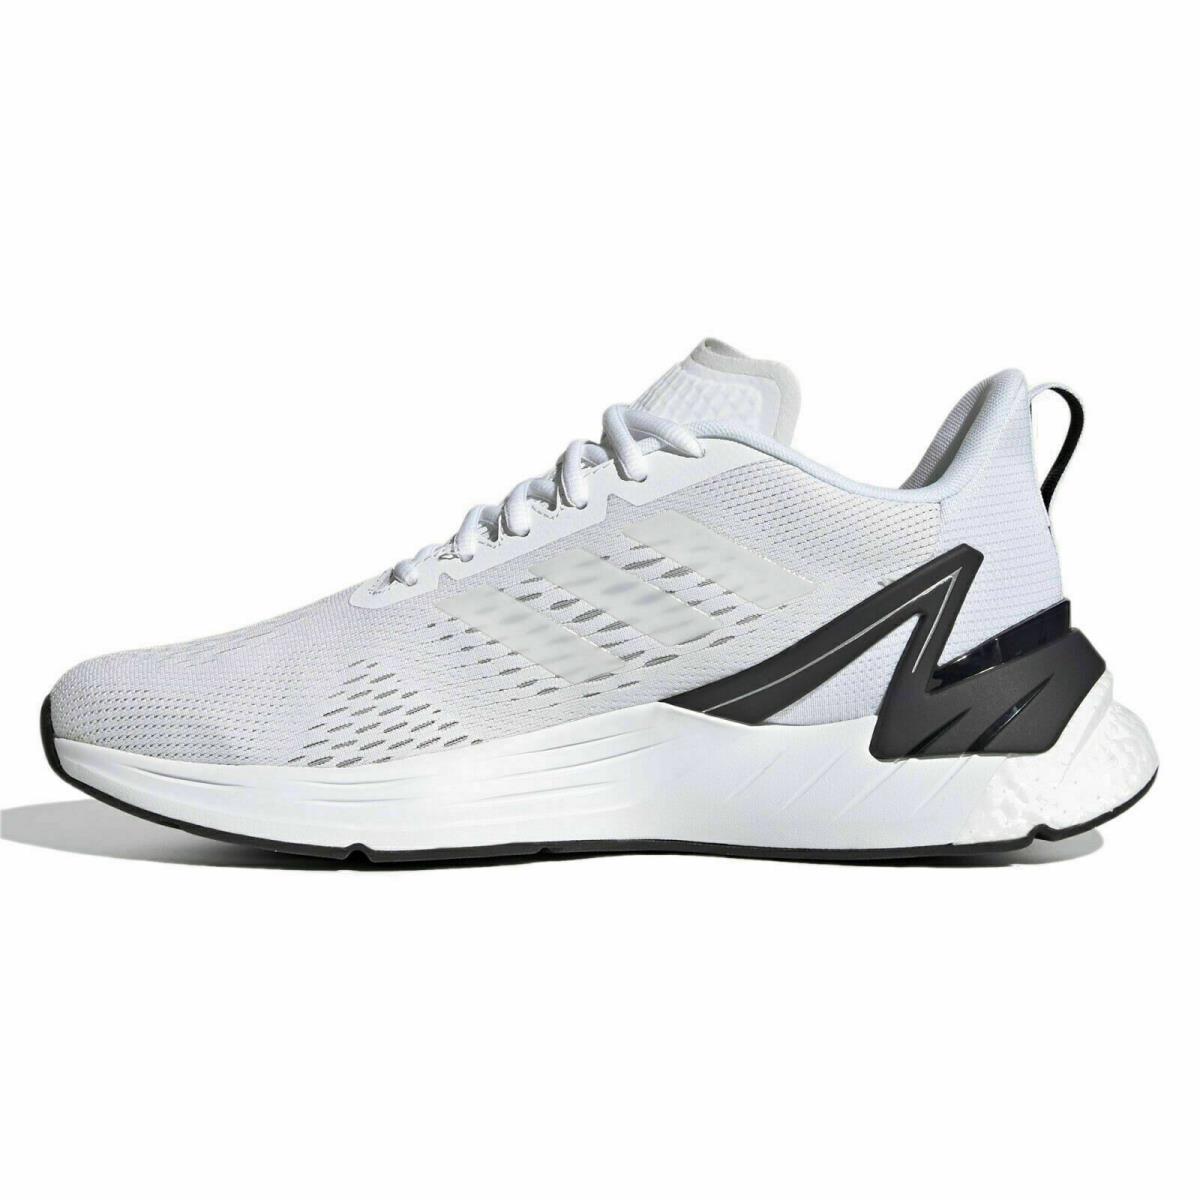 Adidas Response Super Mens Running Shoes Boost - White/gry FX4830 US Sz 9 to 11 White/Gray/Black